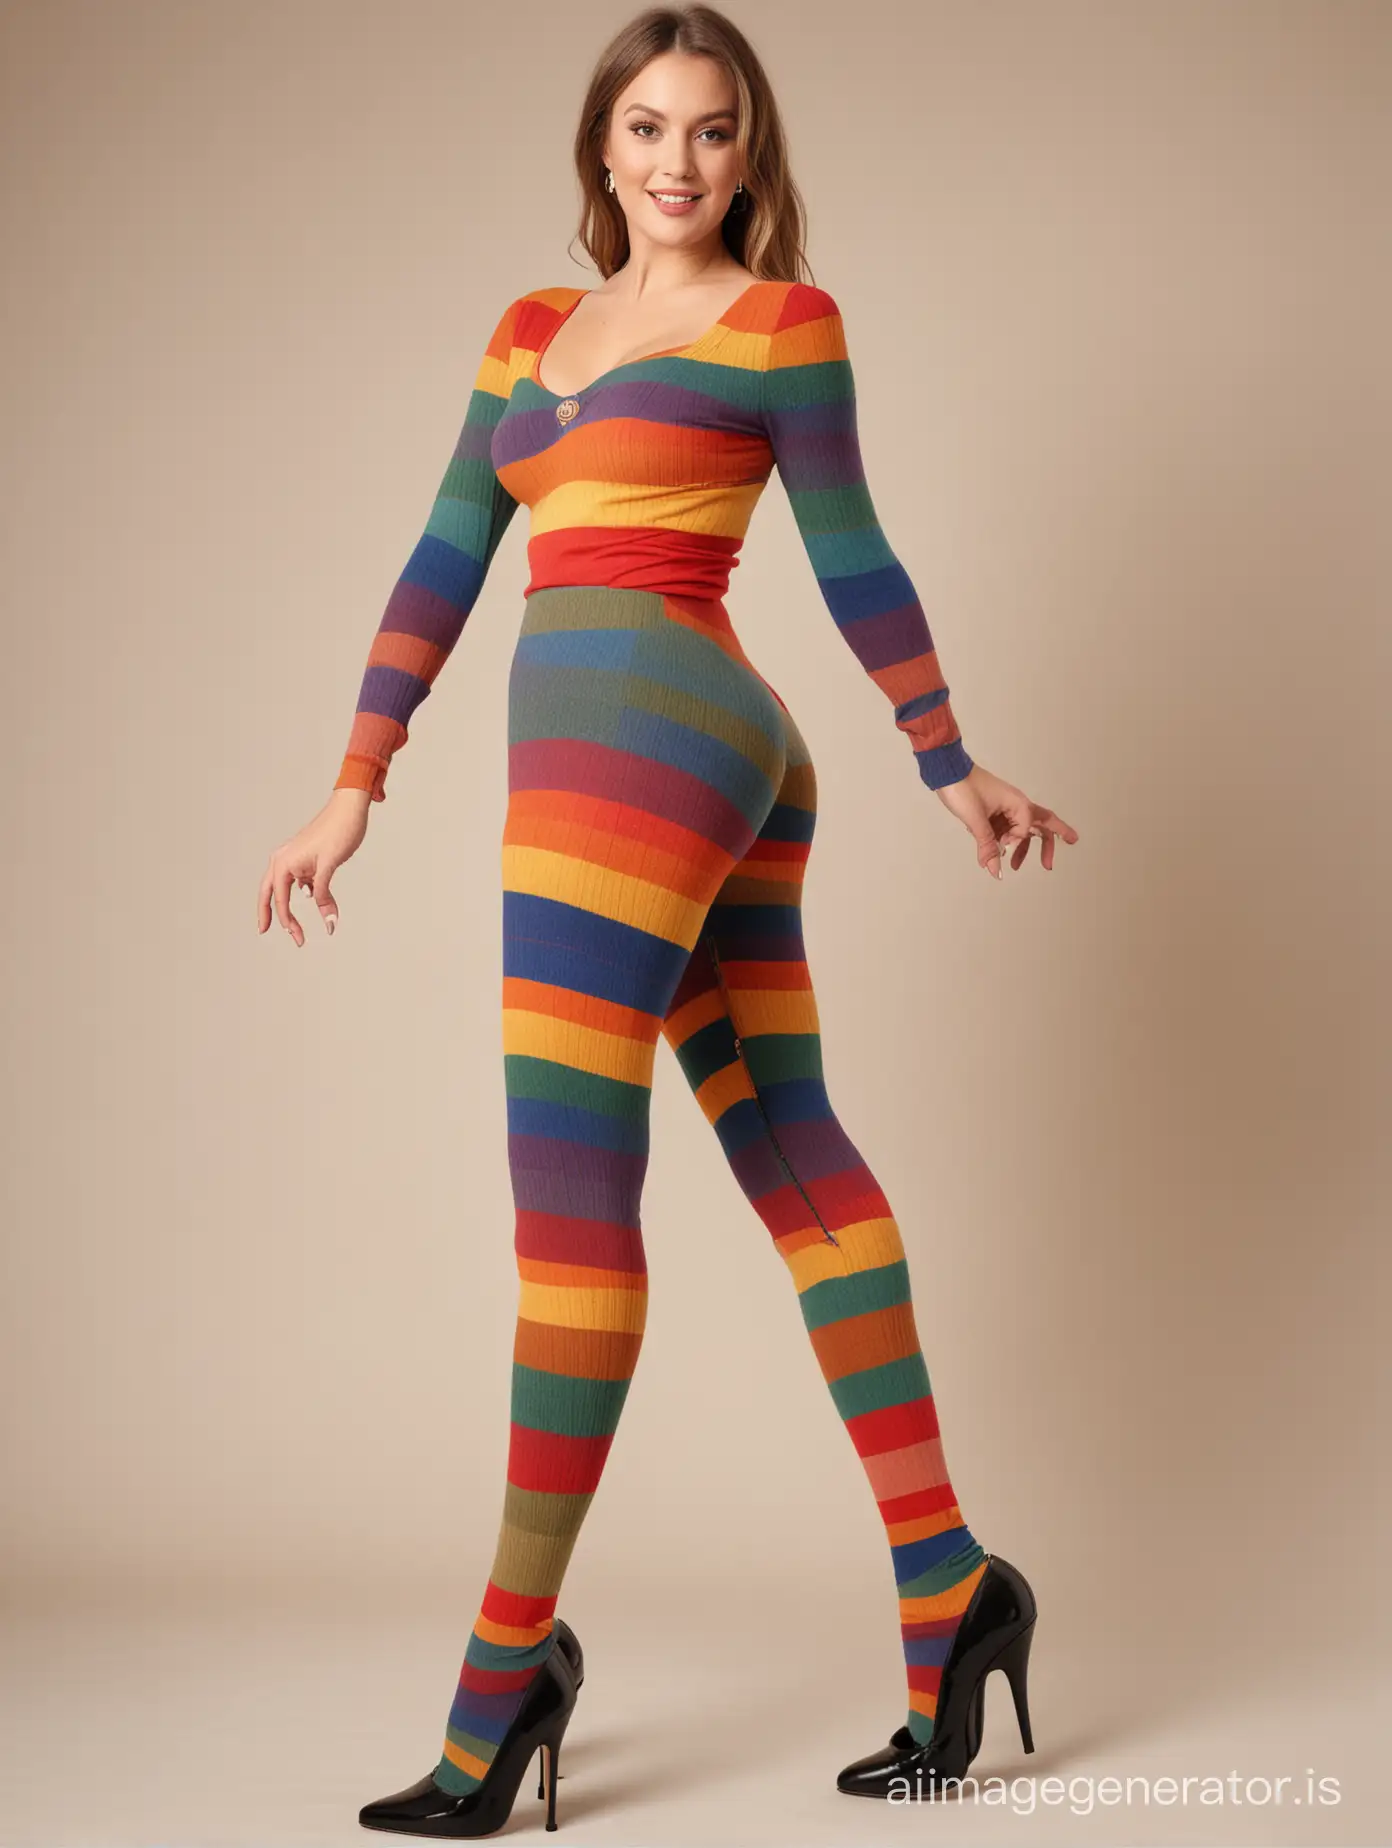 Curvy-Woman-in-Colorful-Rainbow-Wool-Tights-and-High-Heels